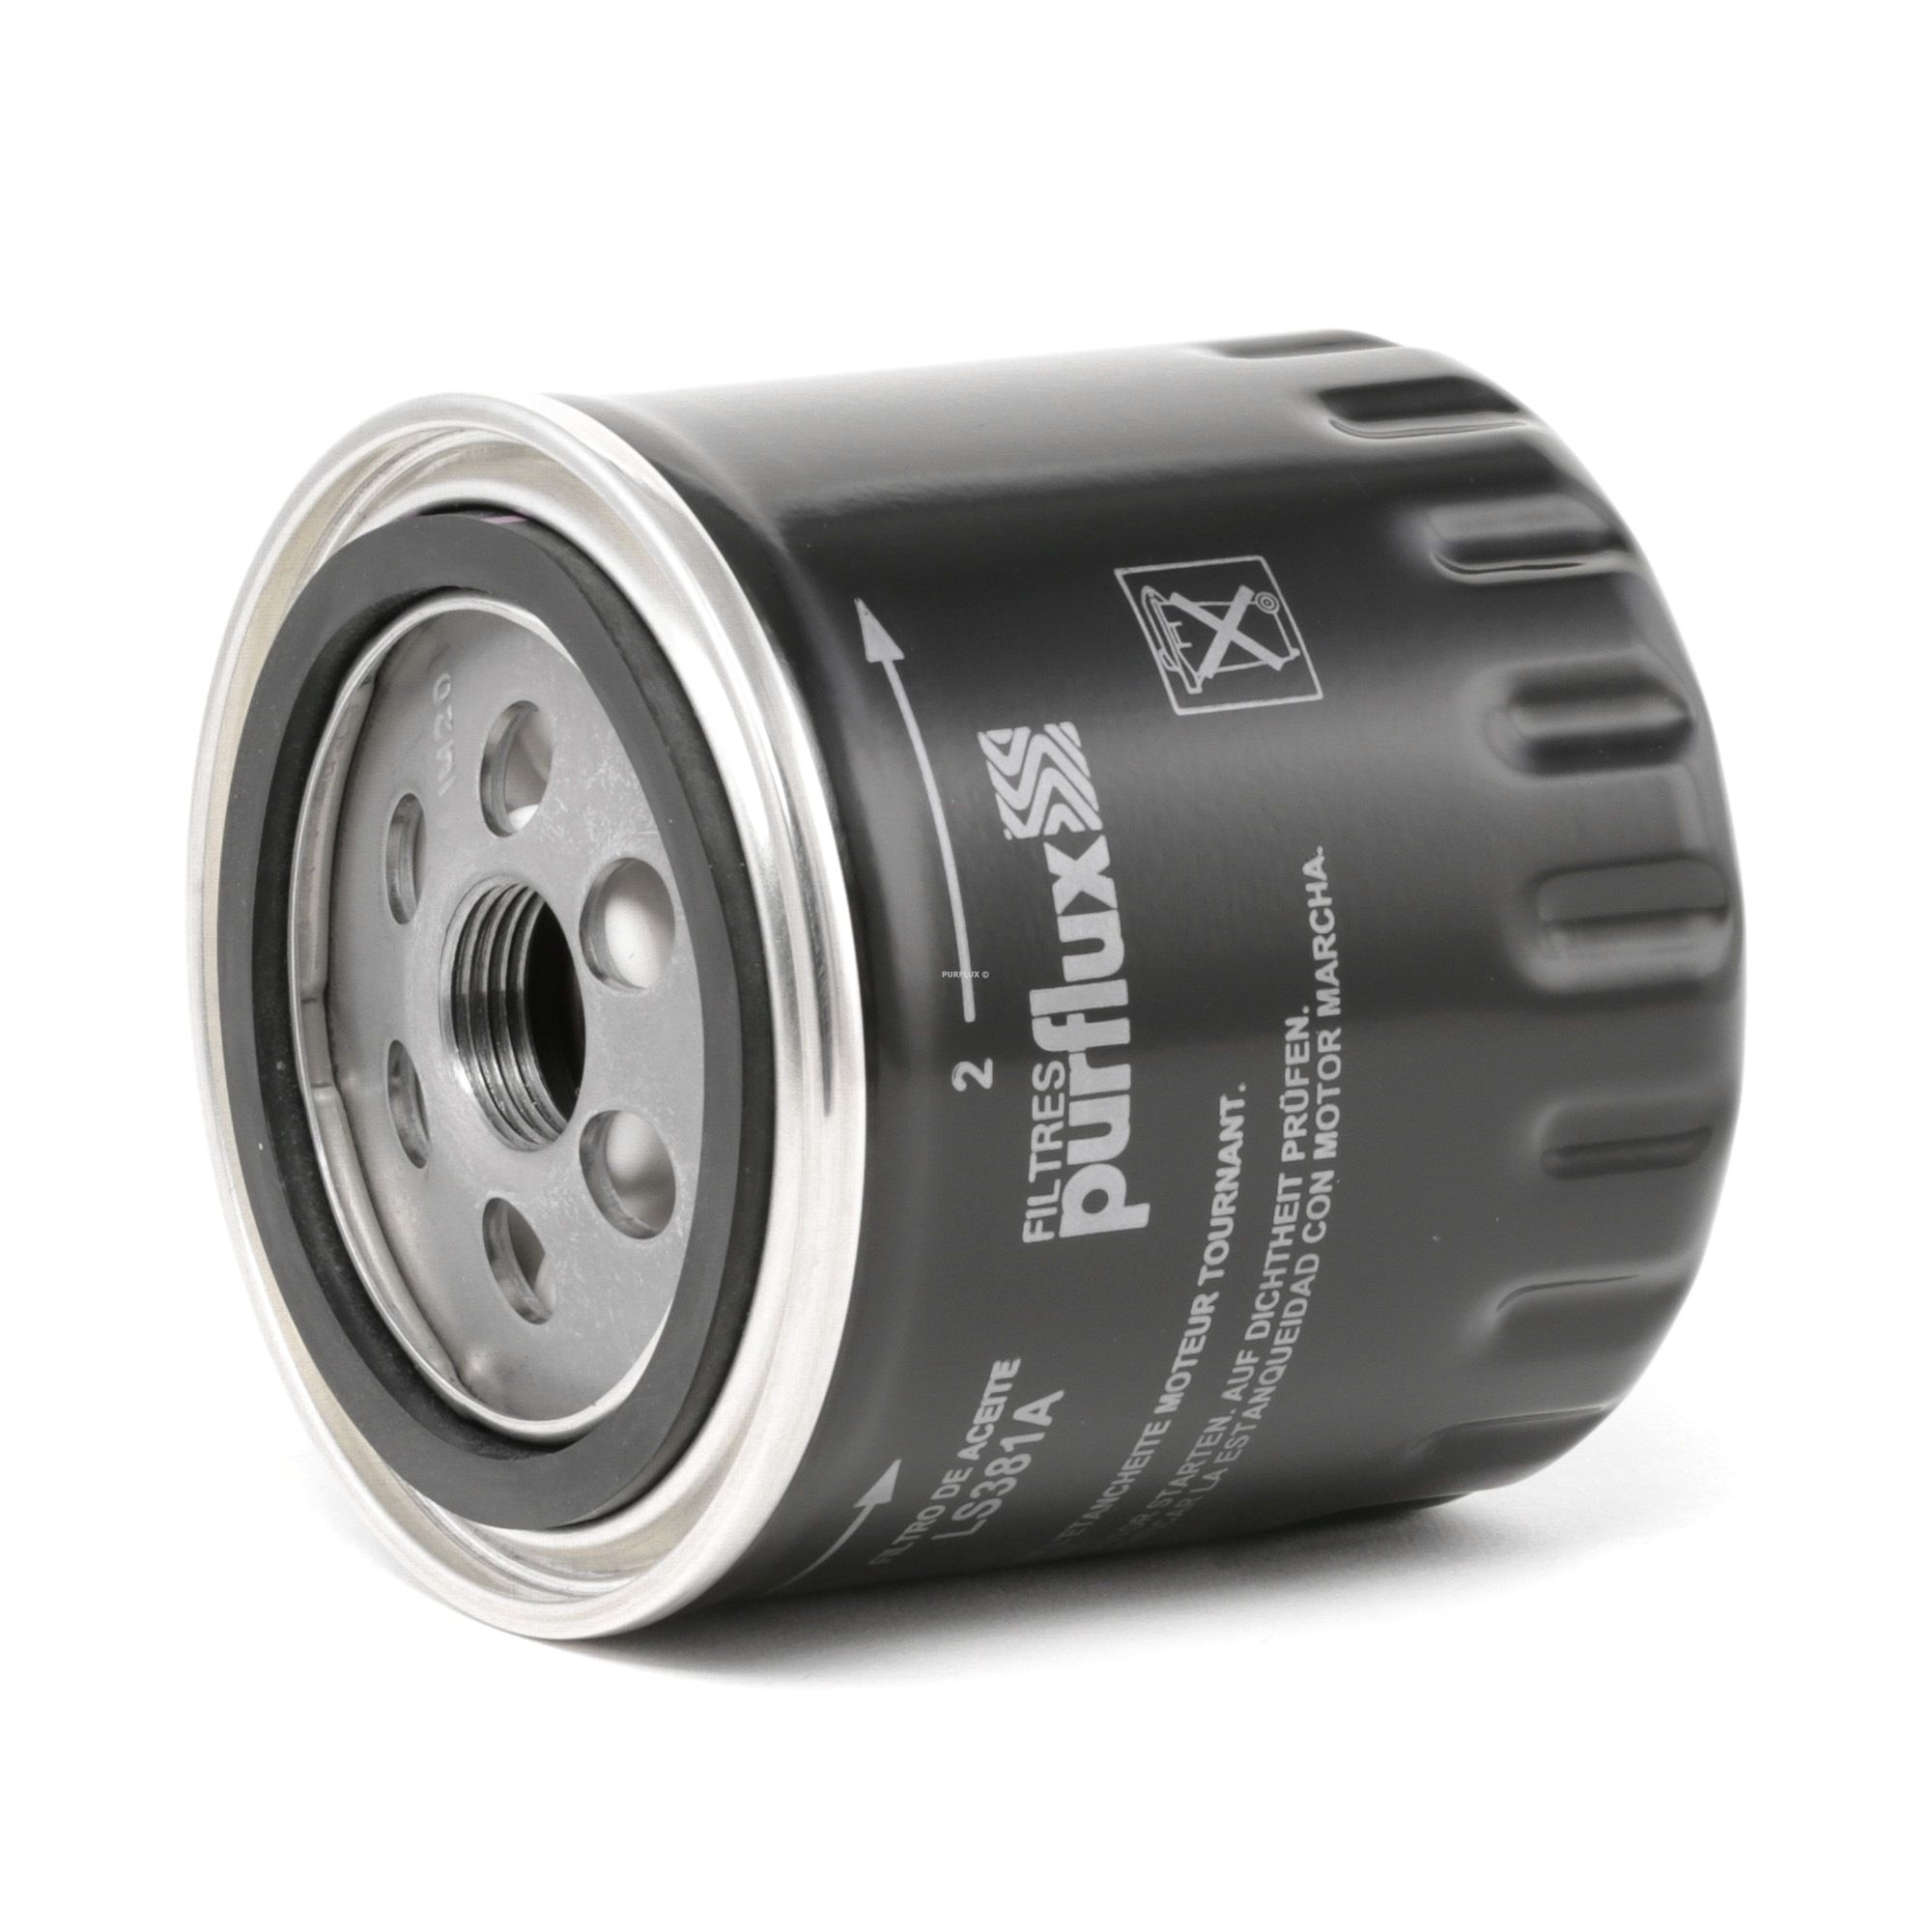 PURFLUX LS381A Oil filter SUZUKI experience and price